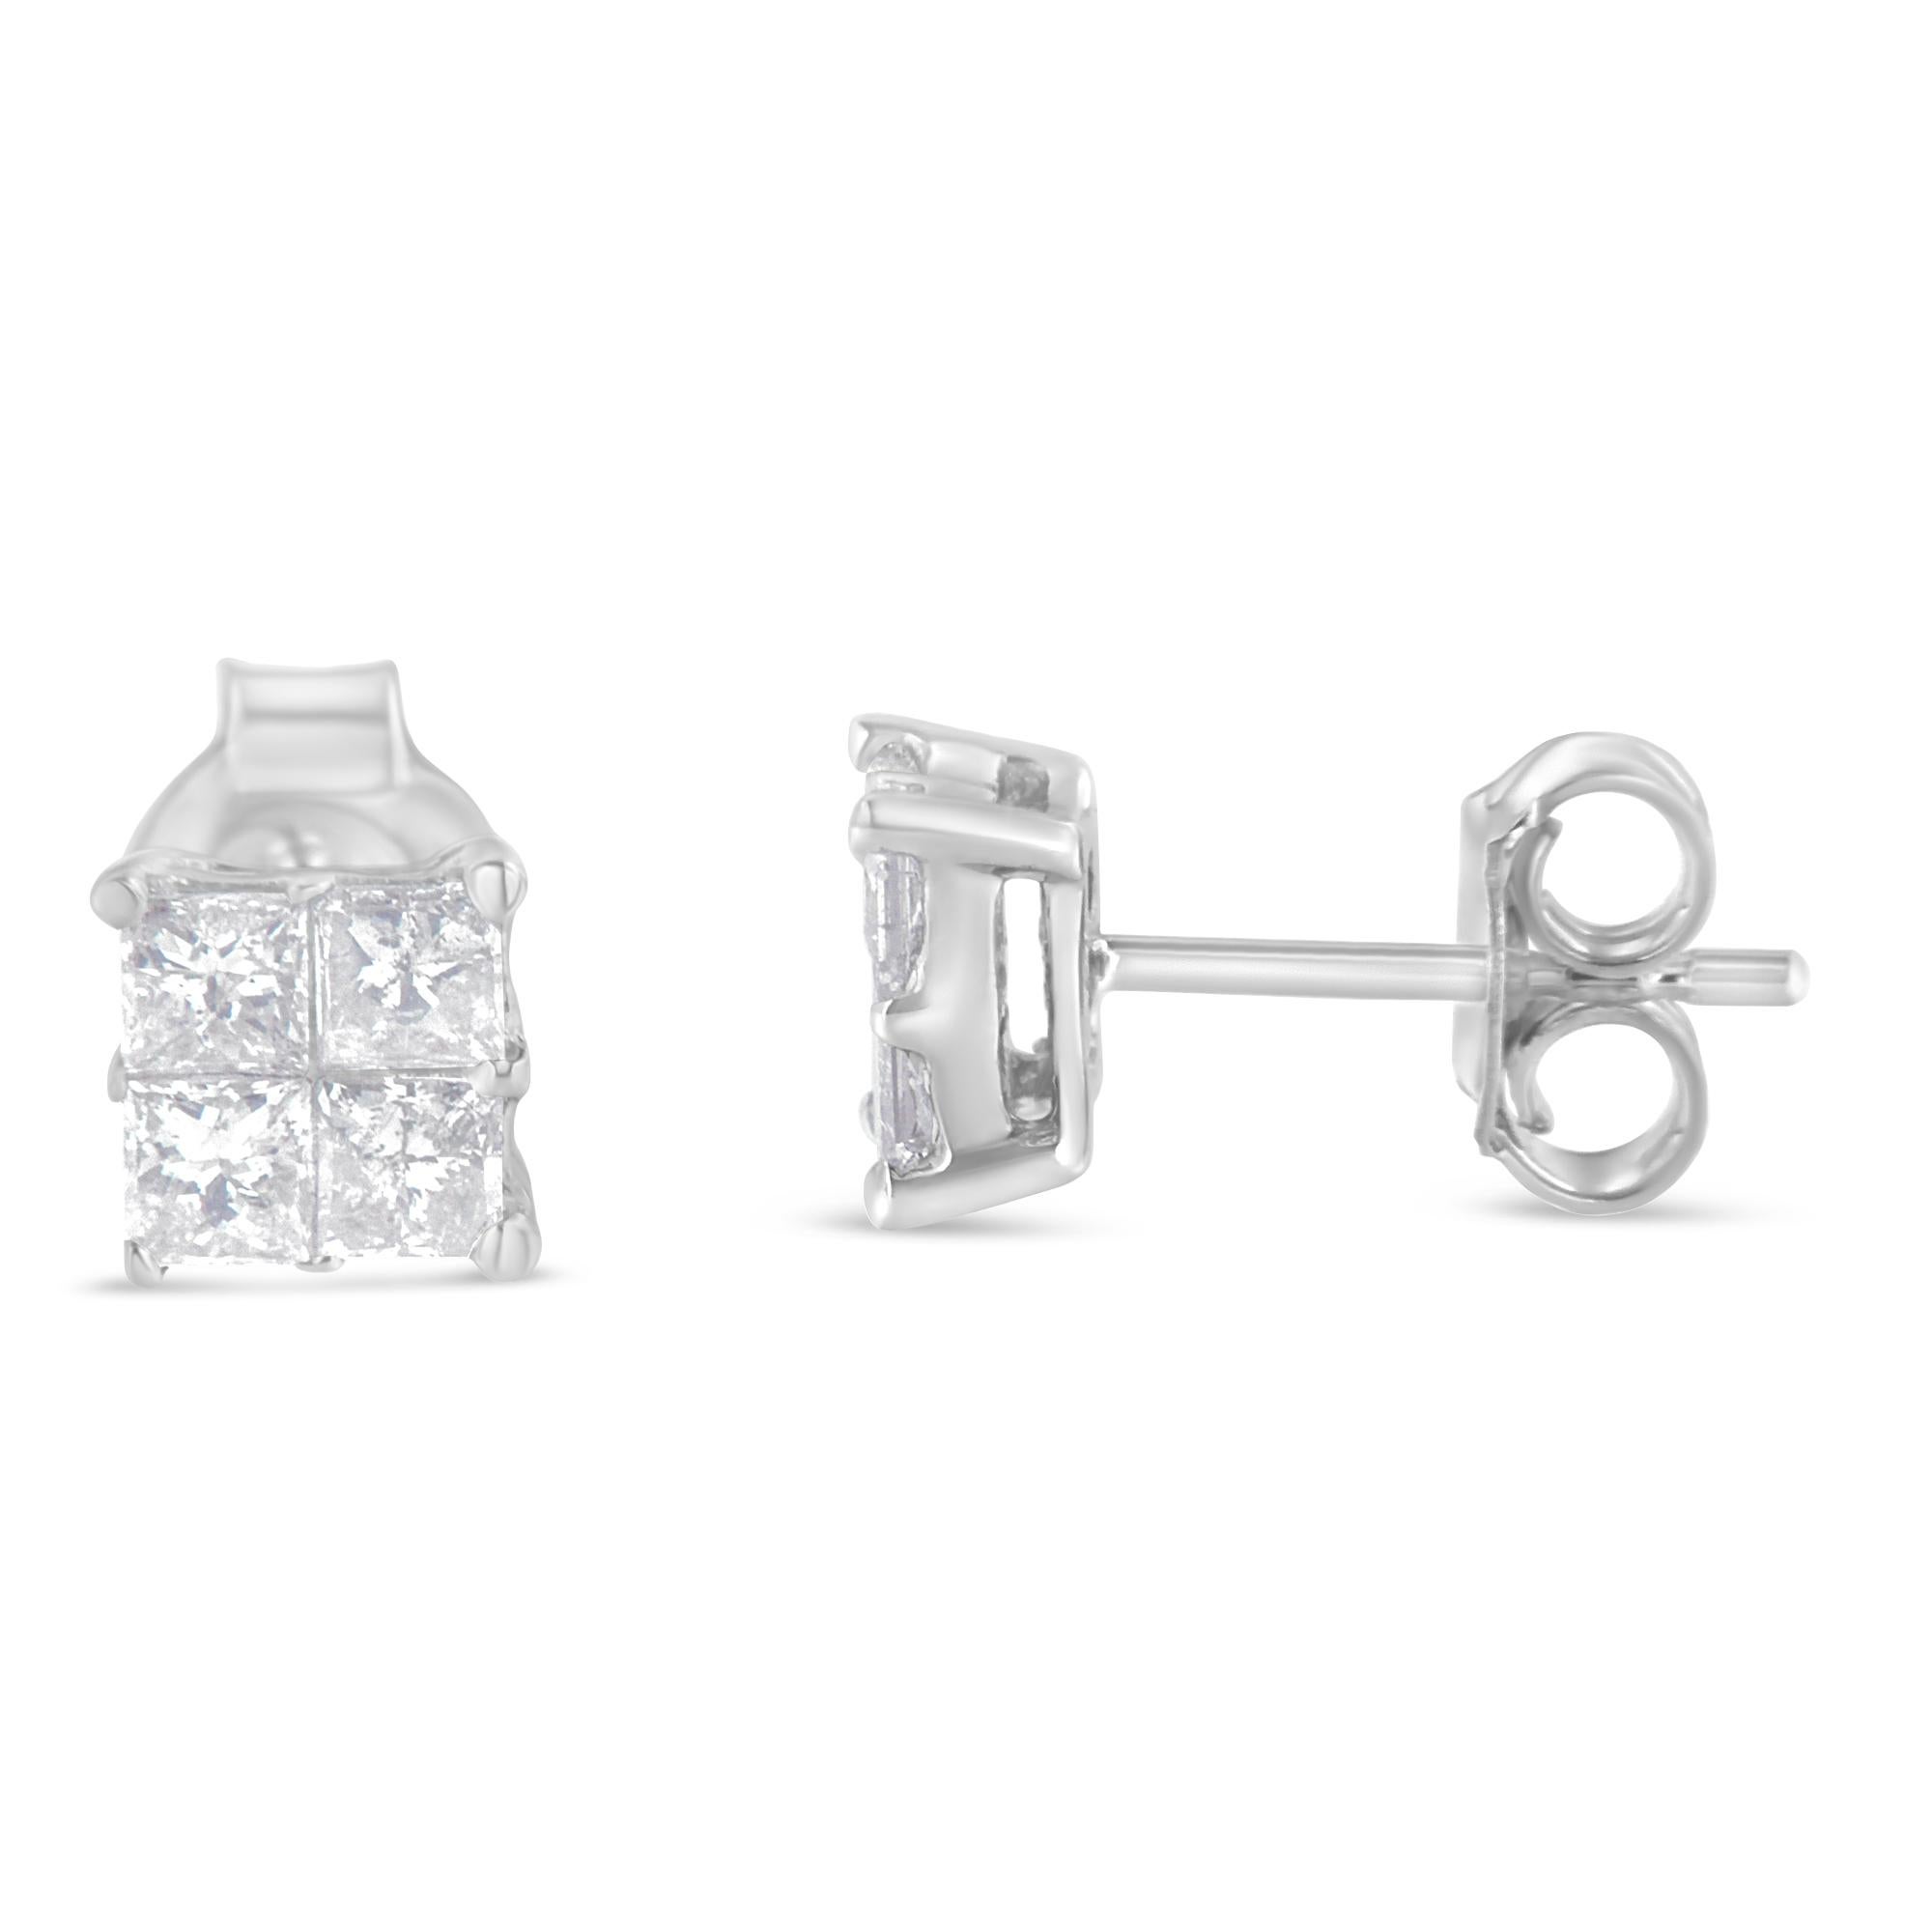 Elegant stud earrings made with the 10k white gold and genuine princess cut diamonds. This marvelous piece features 8, invisible set princess shaped diamonds for a bigger, seamless diamond look. The white gold classic squared design is framed with 4